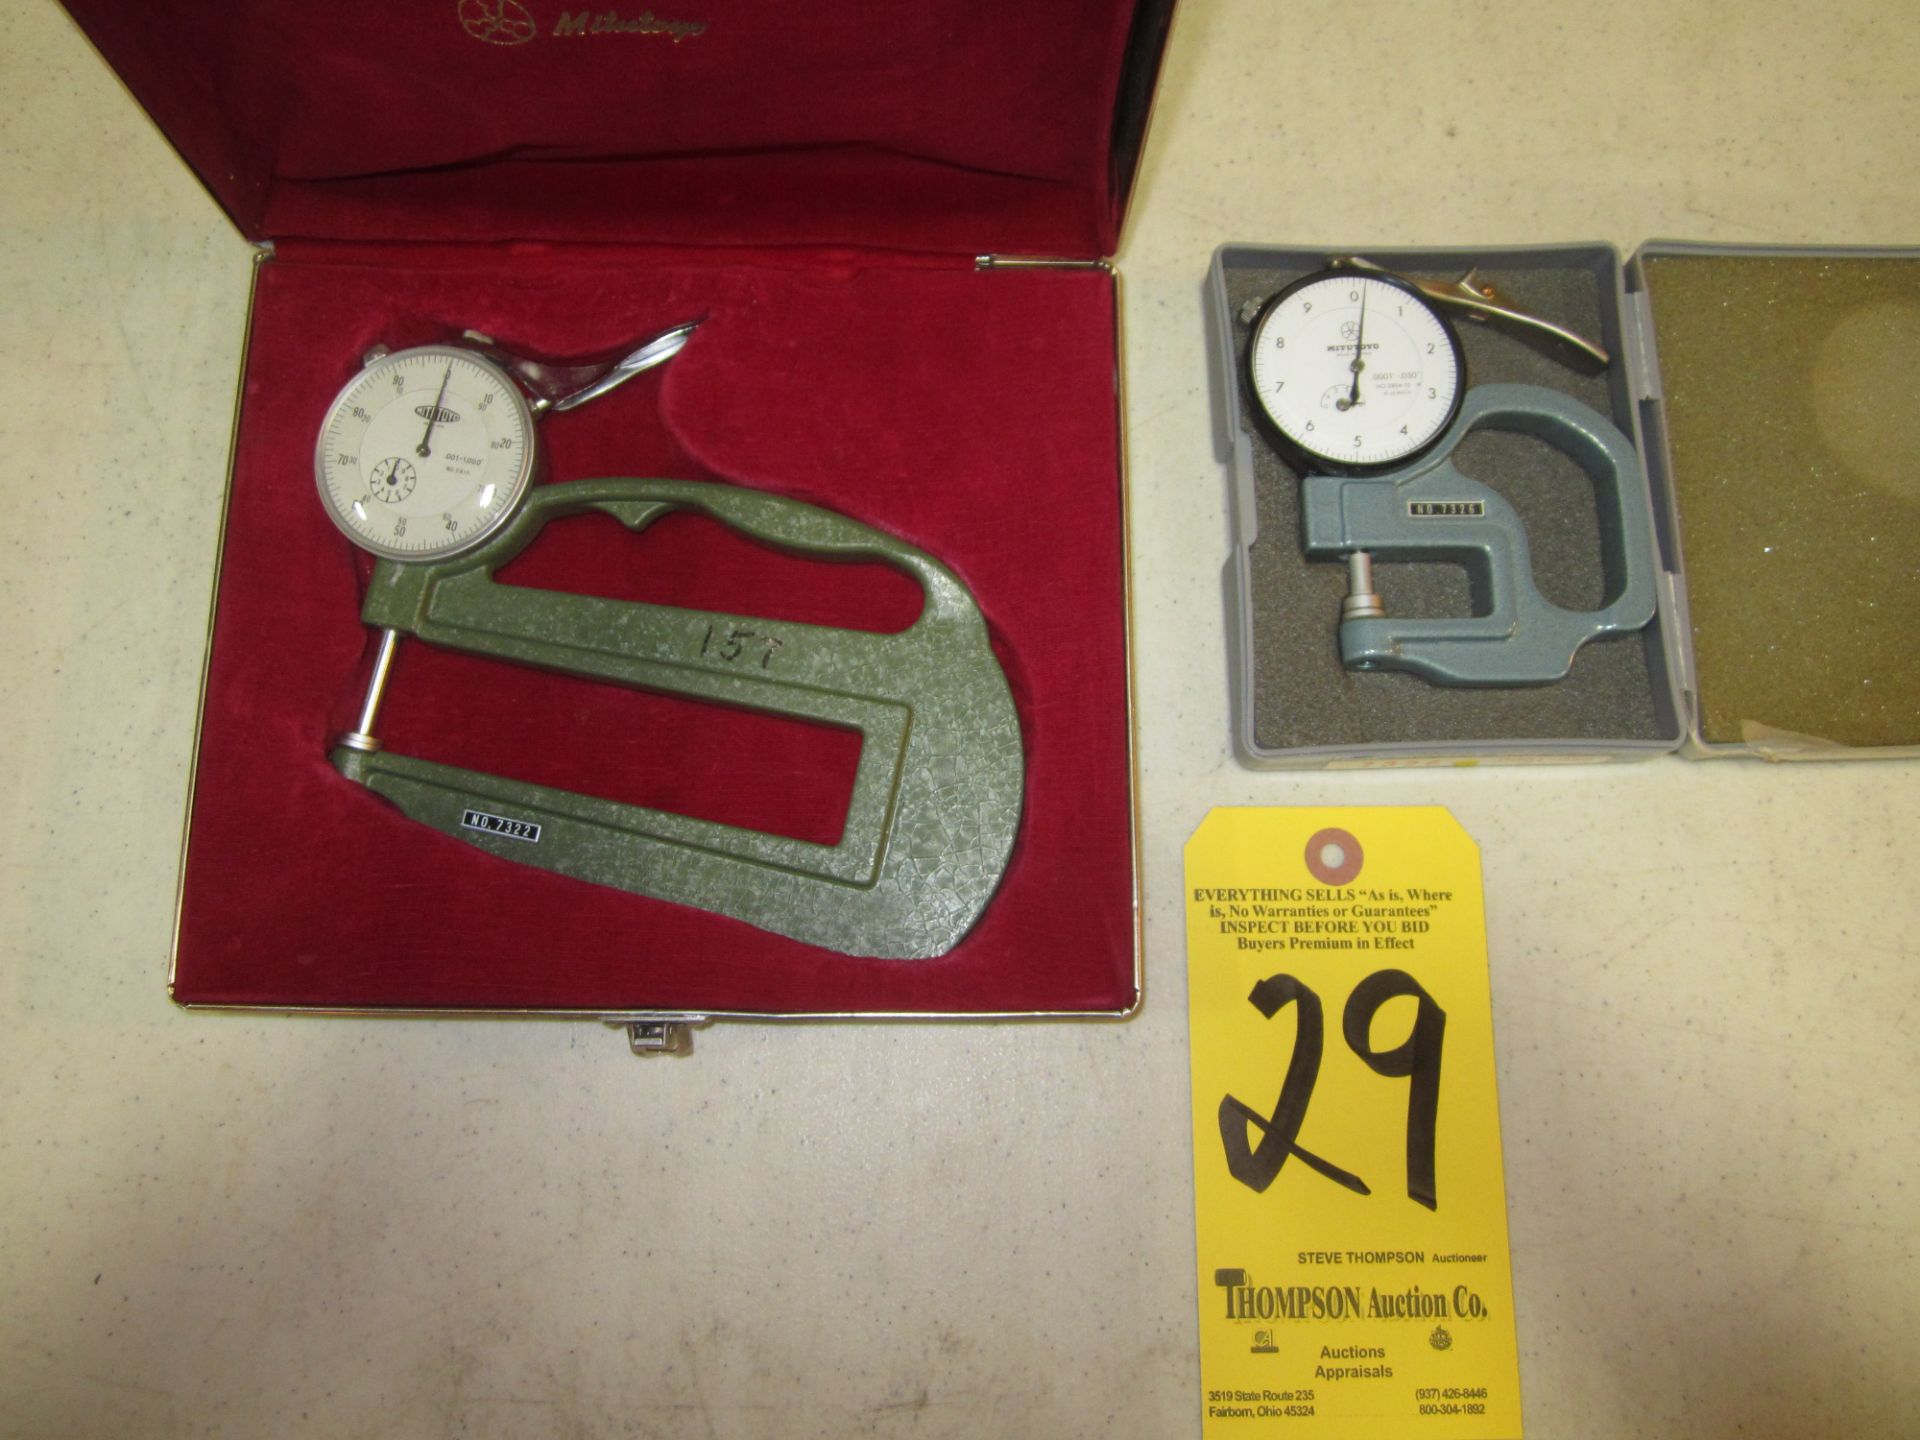 Mitutoyo 7326 Dial Thickness Gage, and Mitutoyo 7322 Dial Thickness Gage